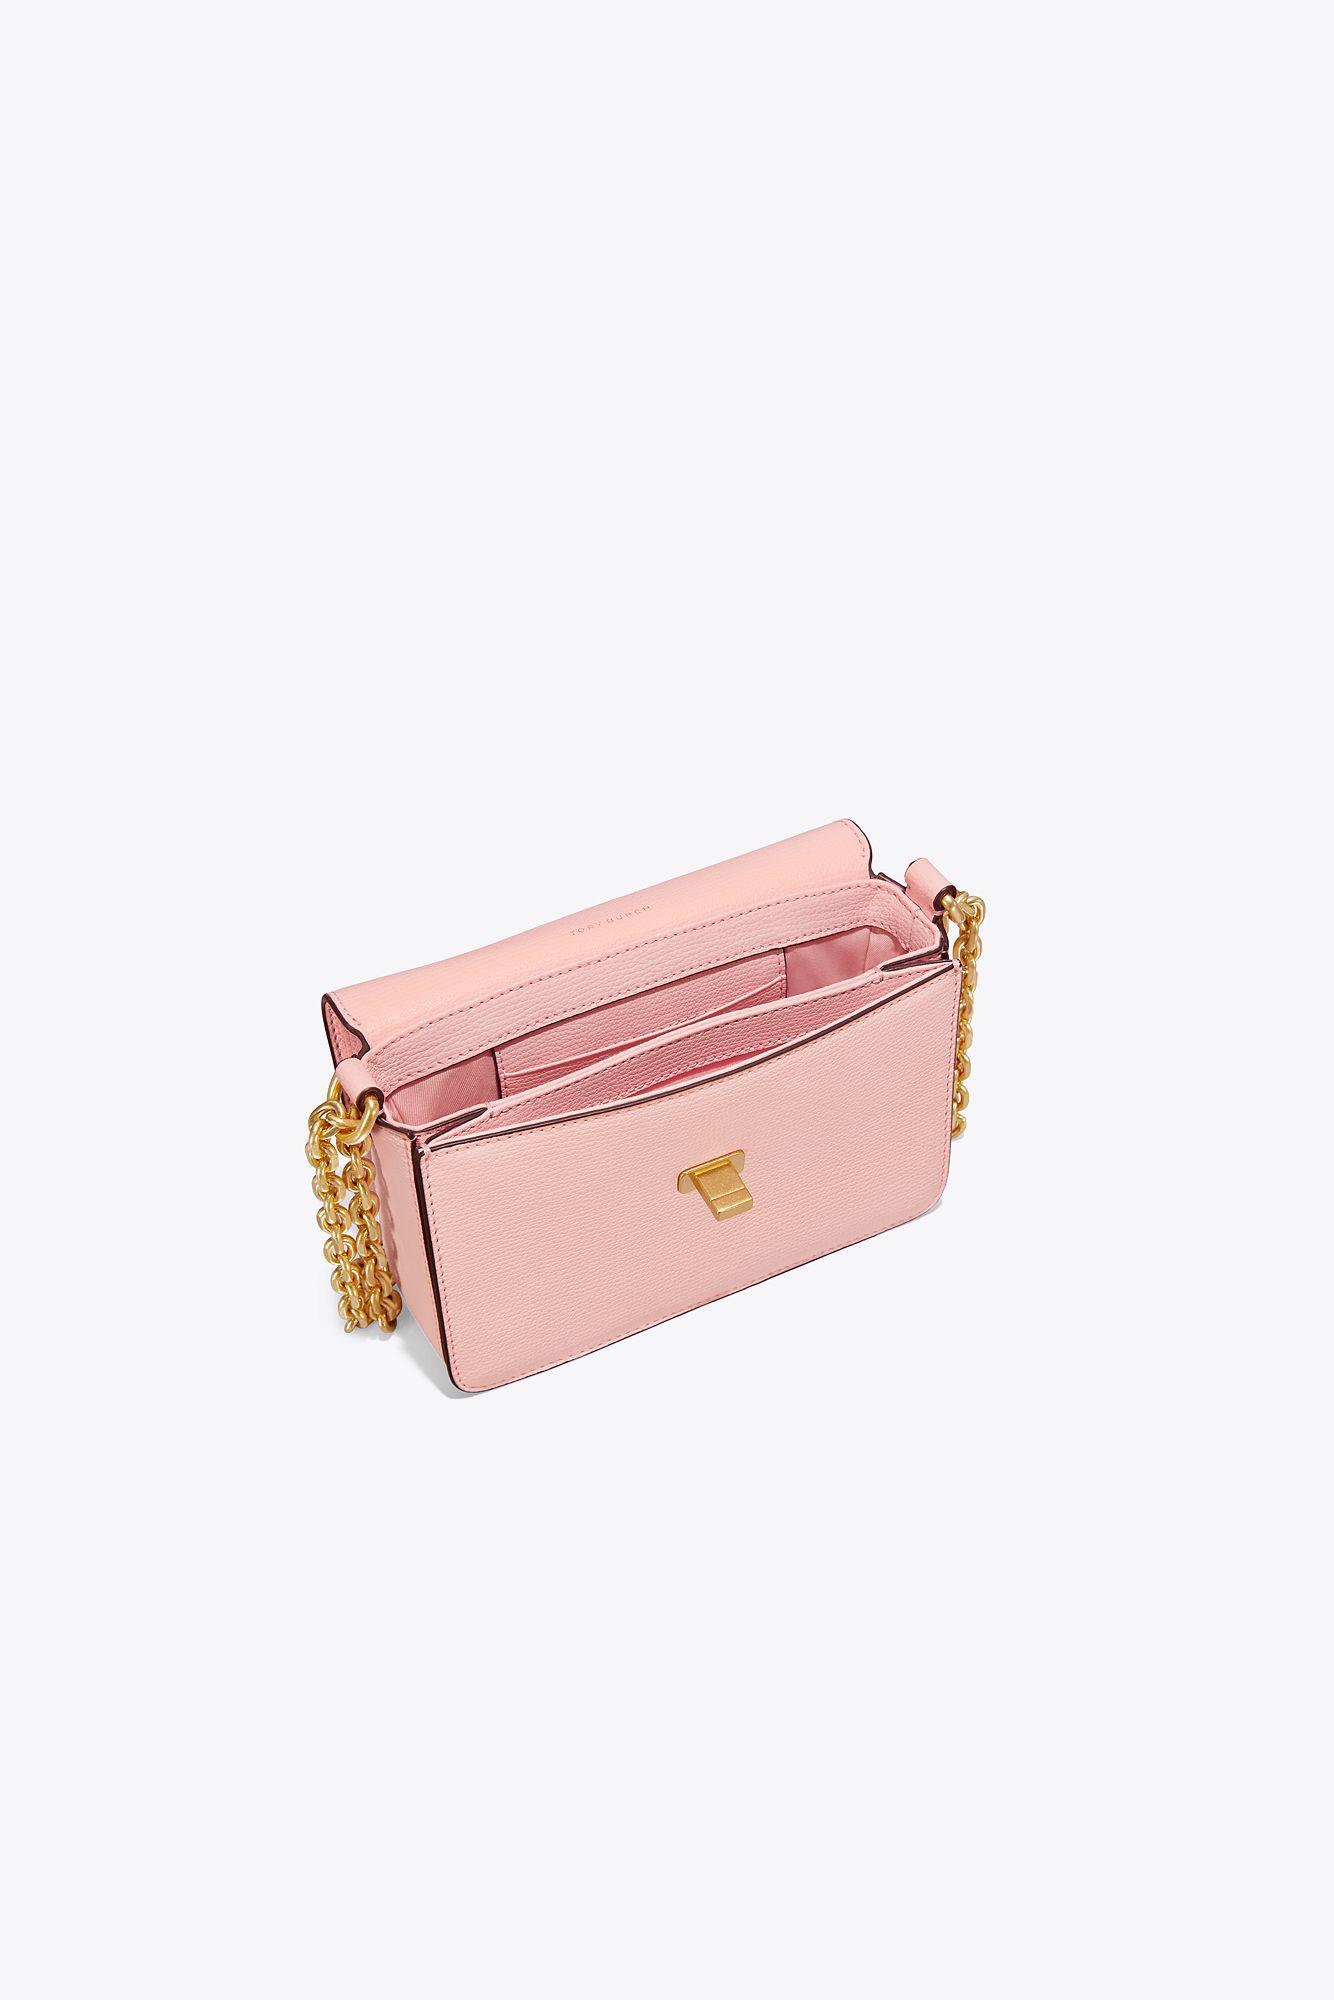 Tory Burch Leather Kira Double-strap Mini Bag in Pink - Lyst